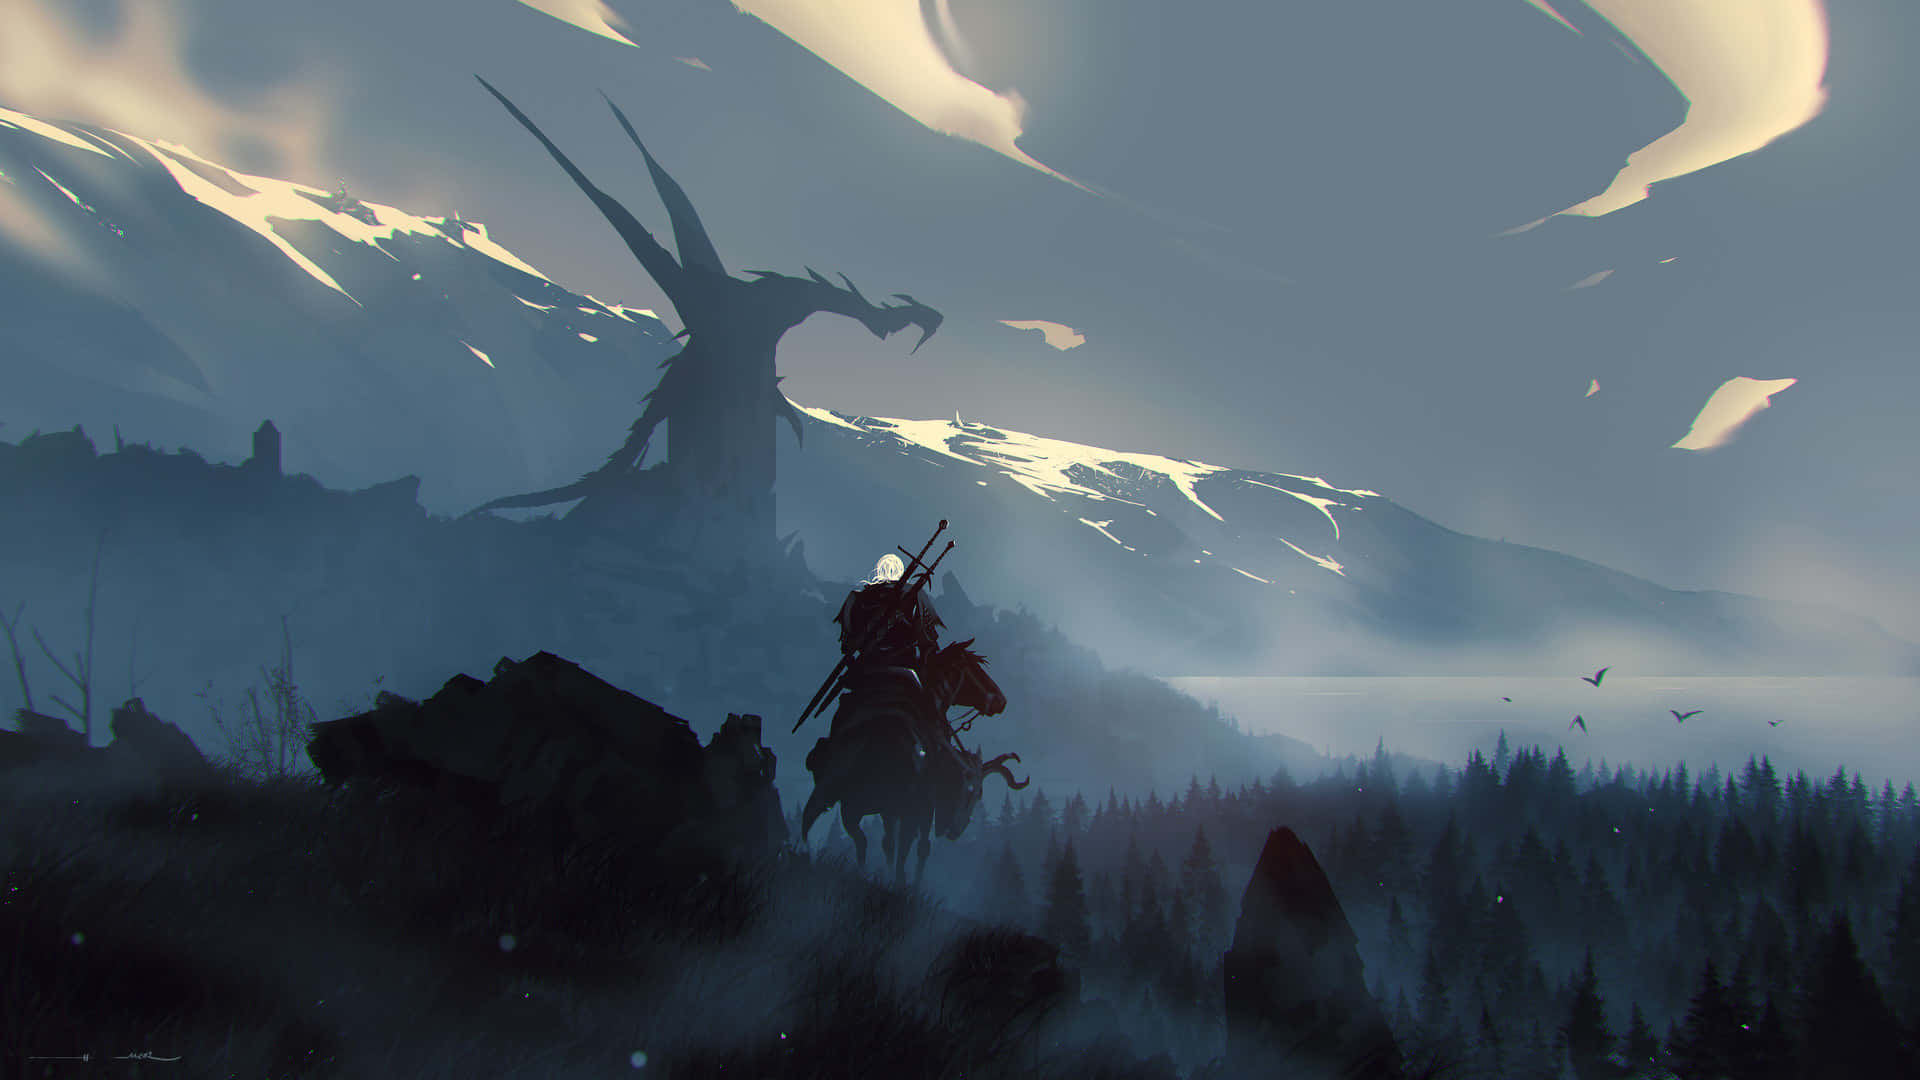 The Witcher - Geralt of Rivia prepares for battle in a breathtaking landscape